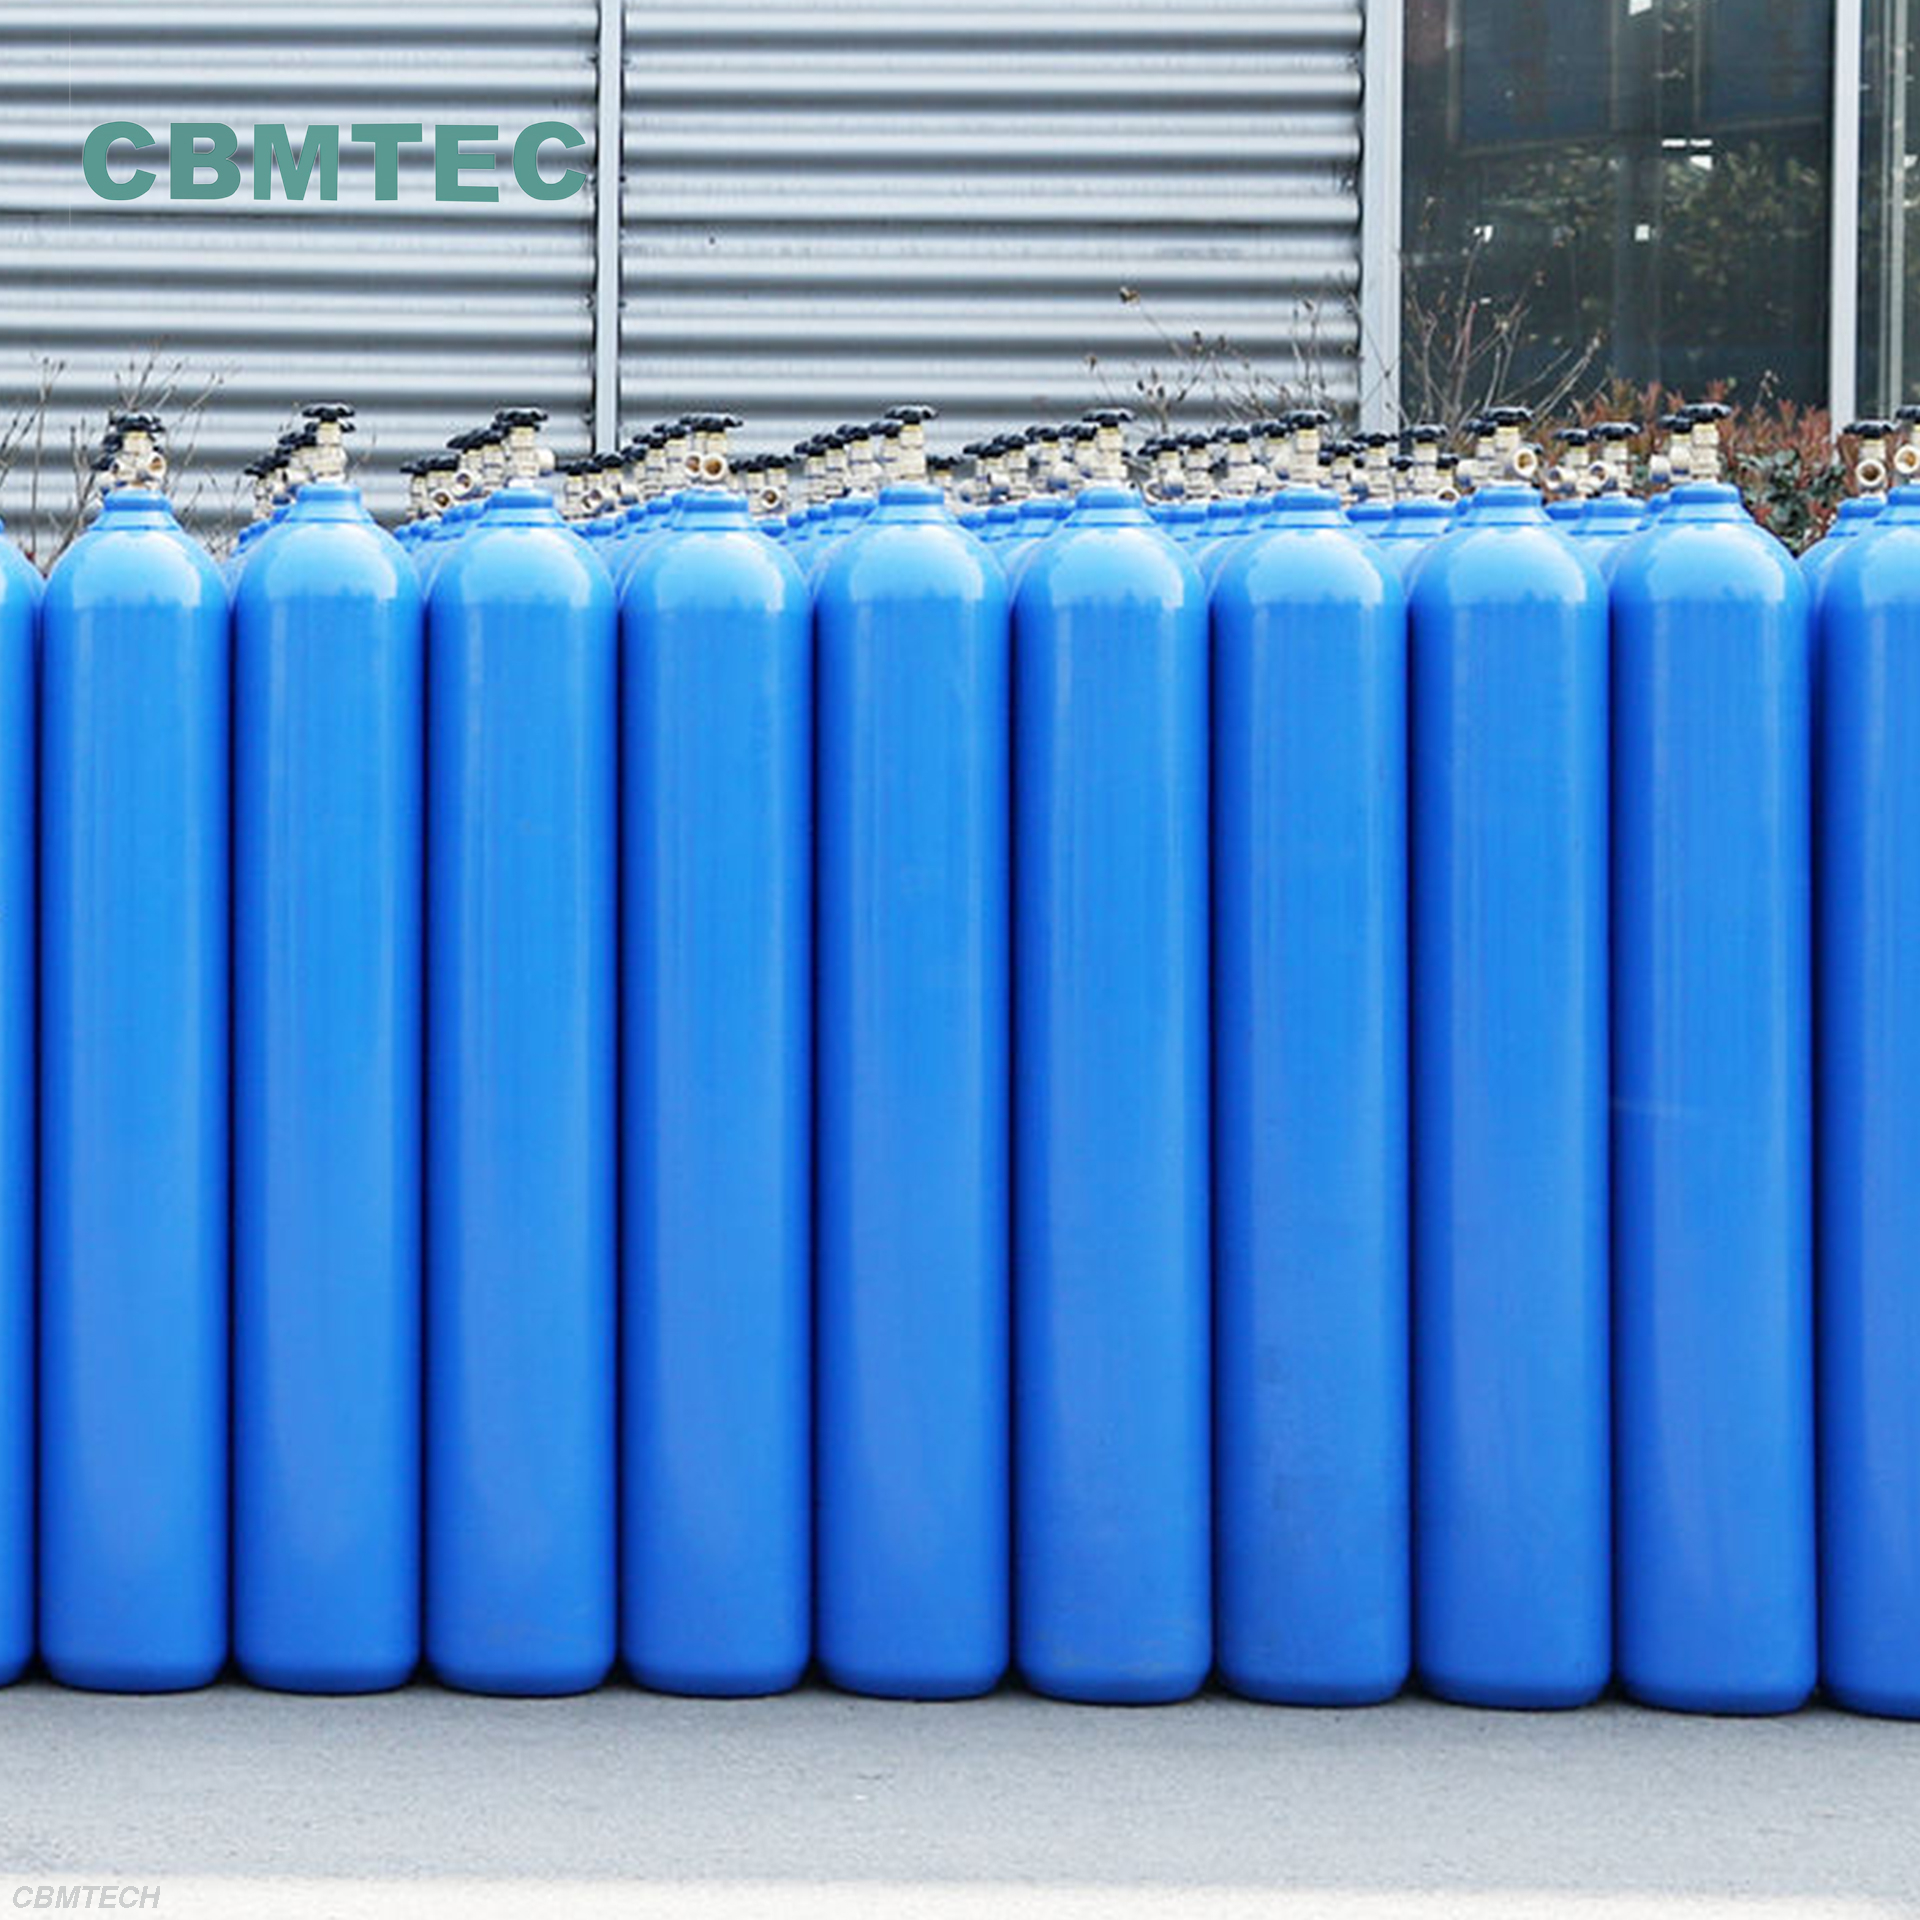 47L Oxygen Cylinders